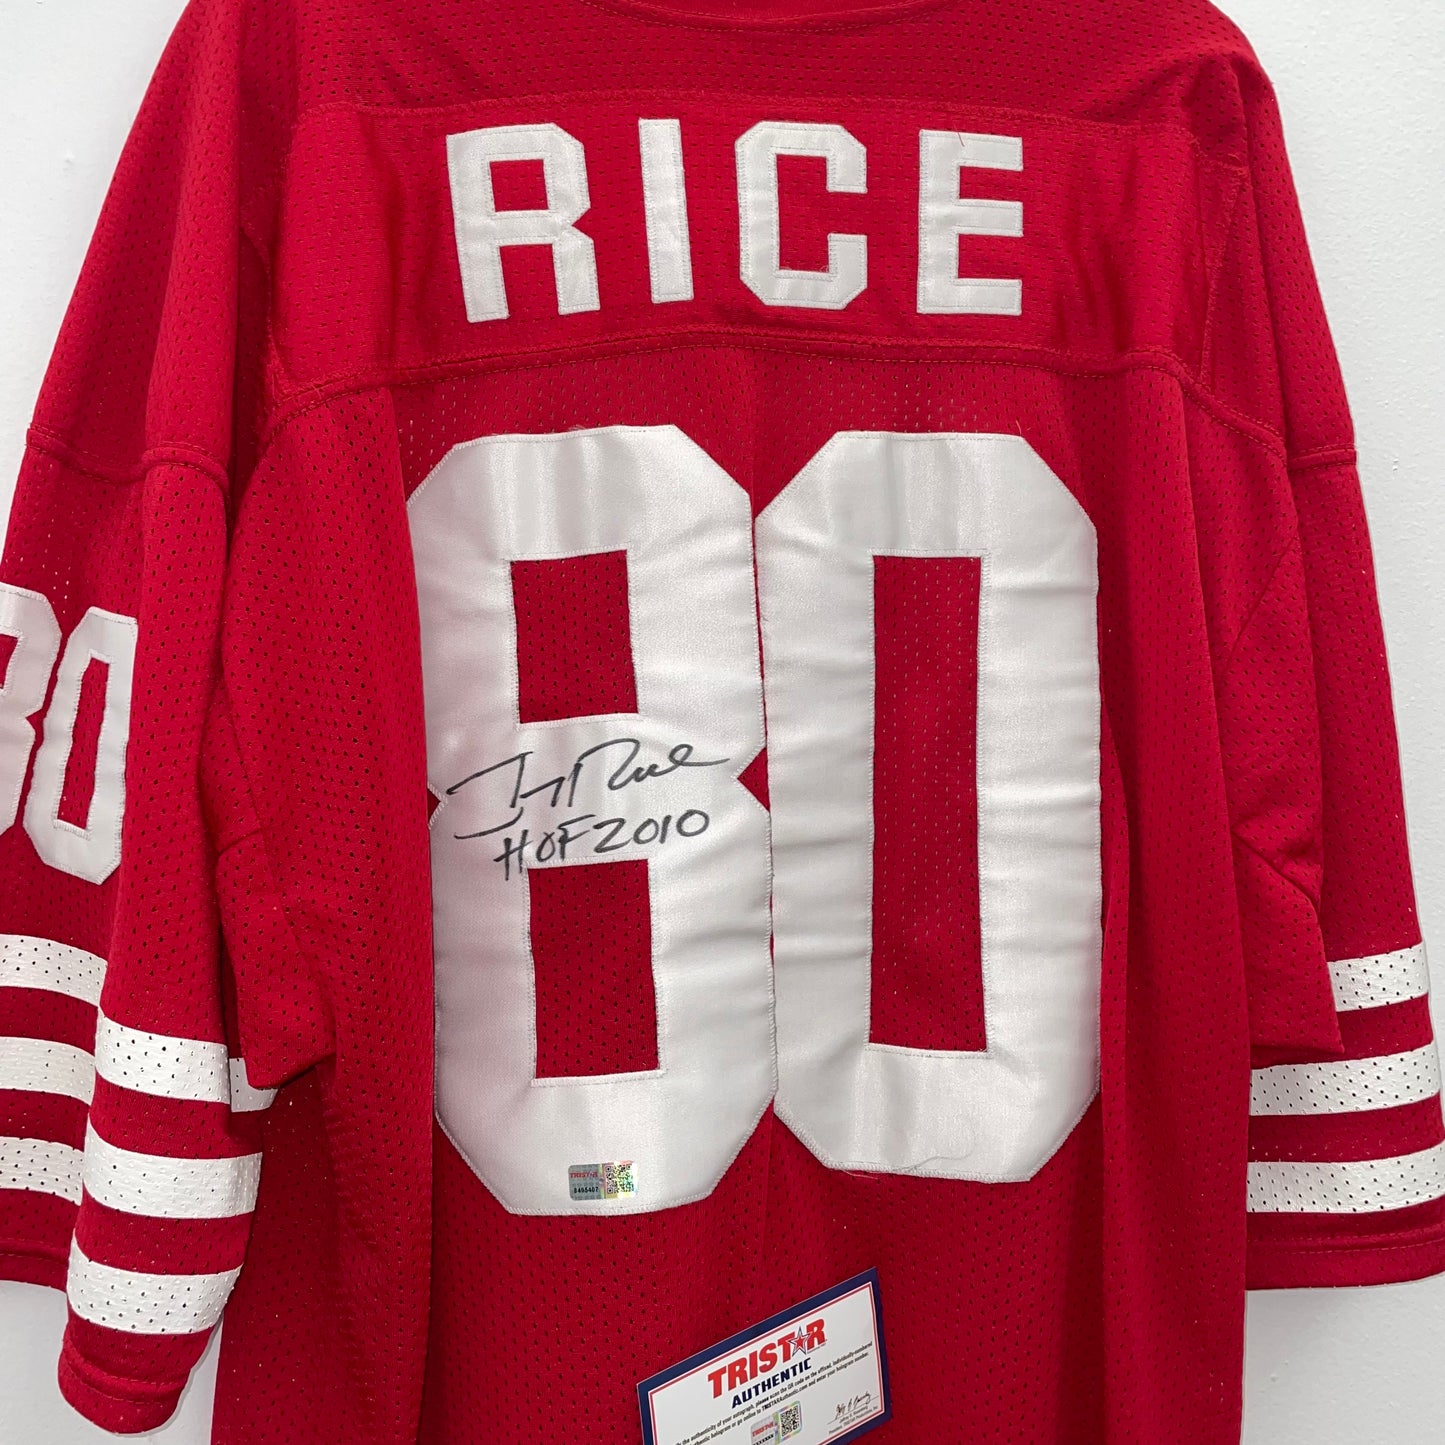 Jerry Rice Signed Auto & Inscribed "HOF 2010" Jersey Tristar AUTH Size 52